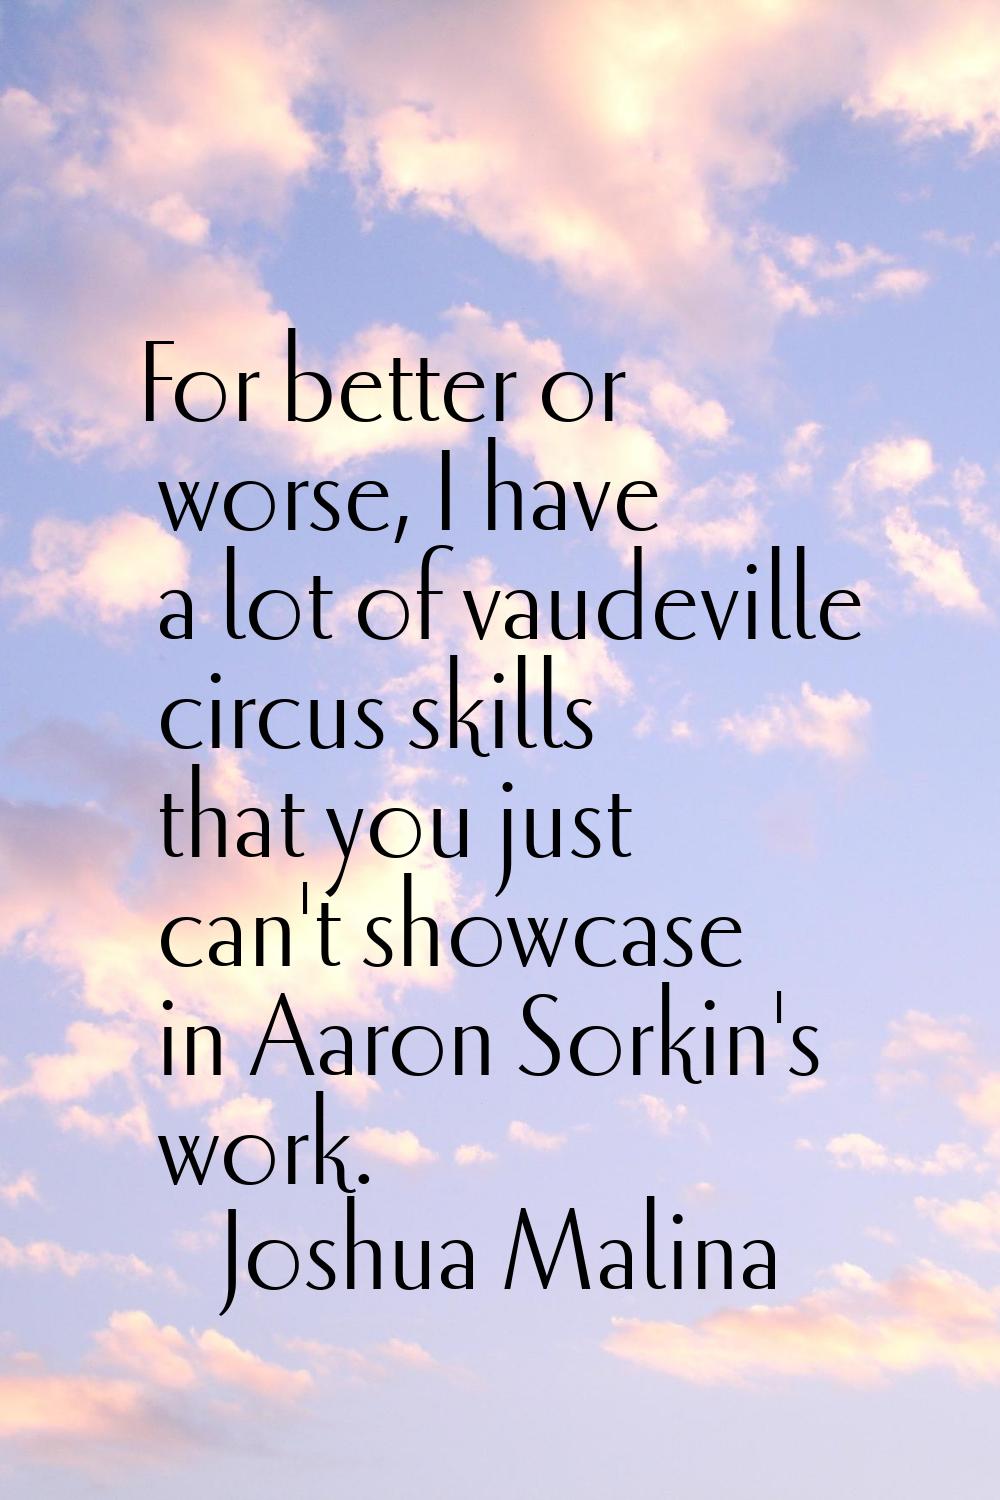 For better or worse, I have a lot of vaudeville circus skills that you just can't showcase in Aaron